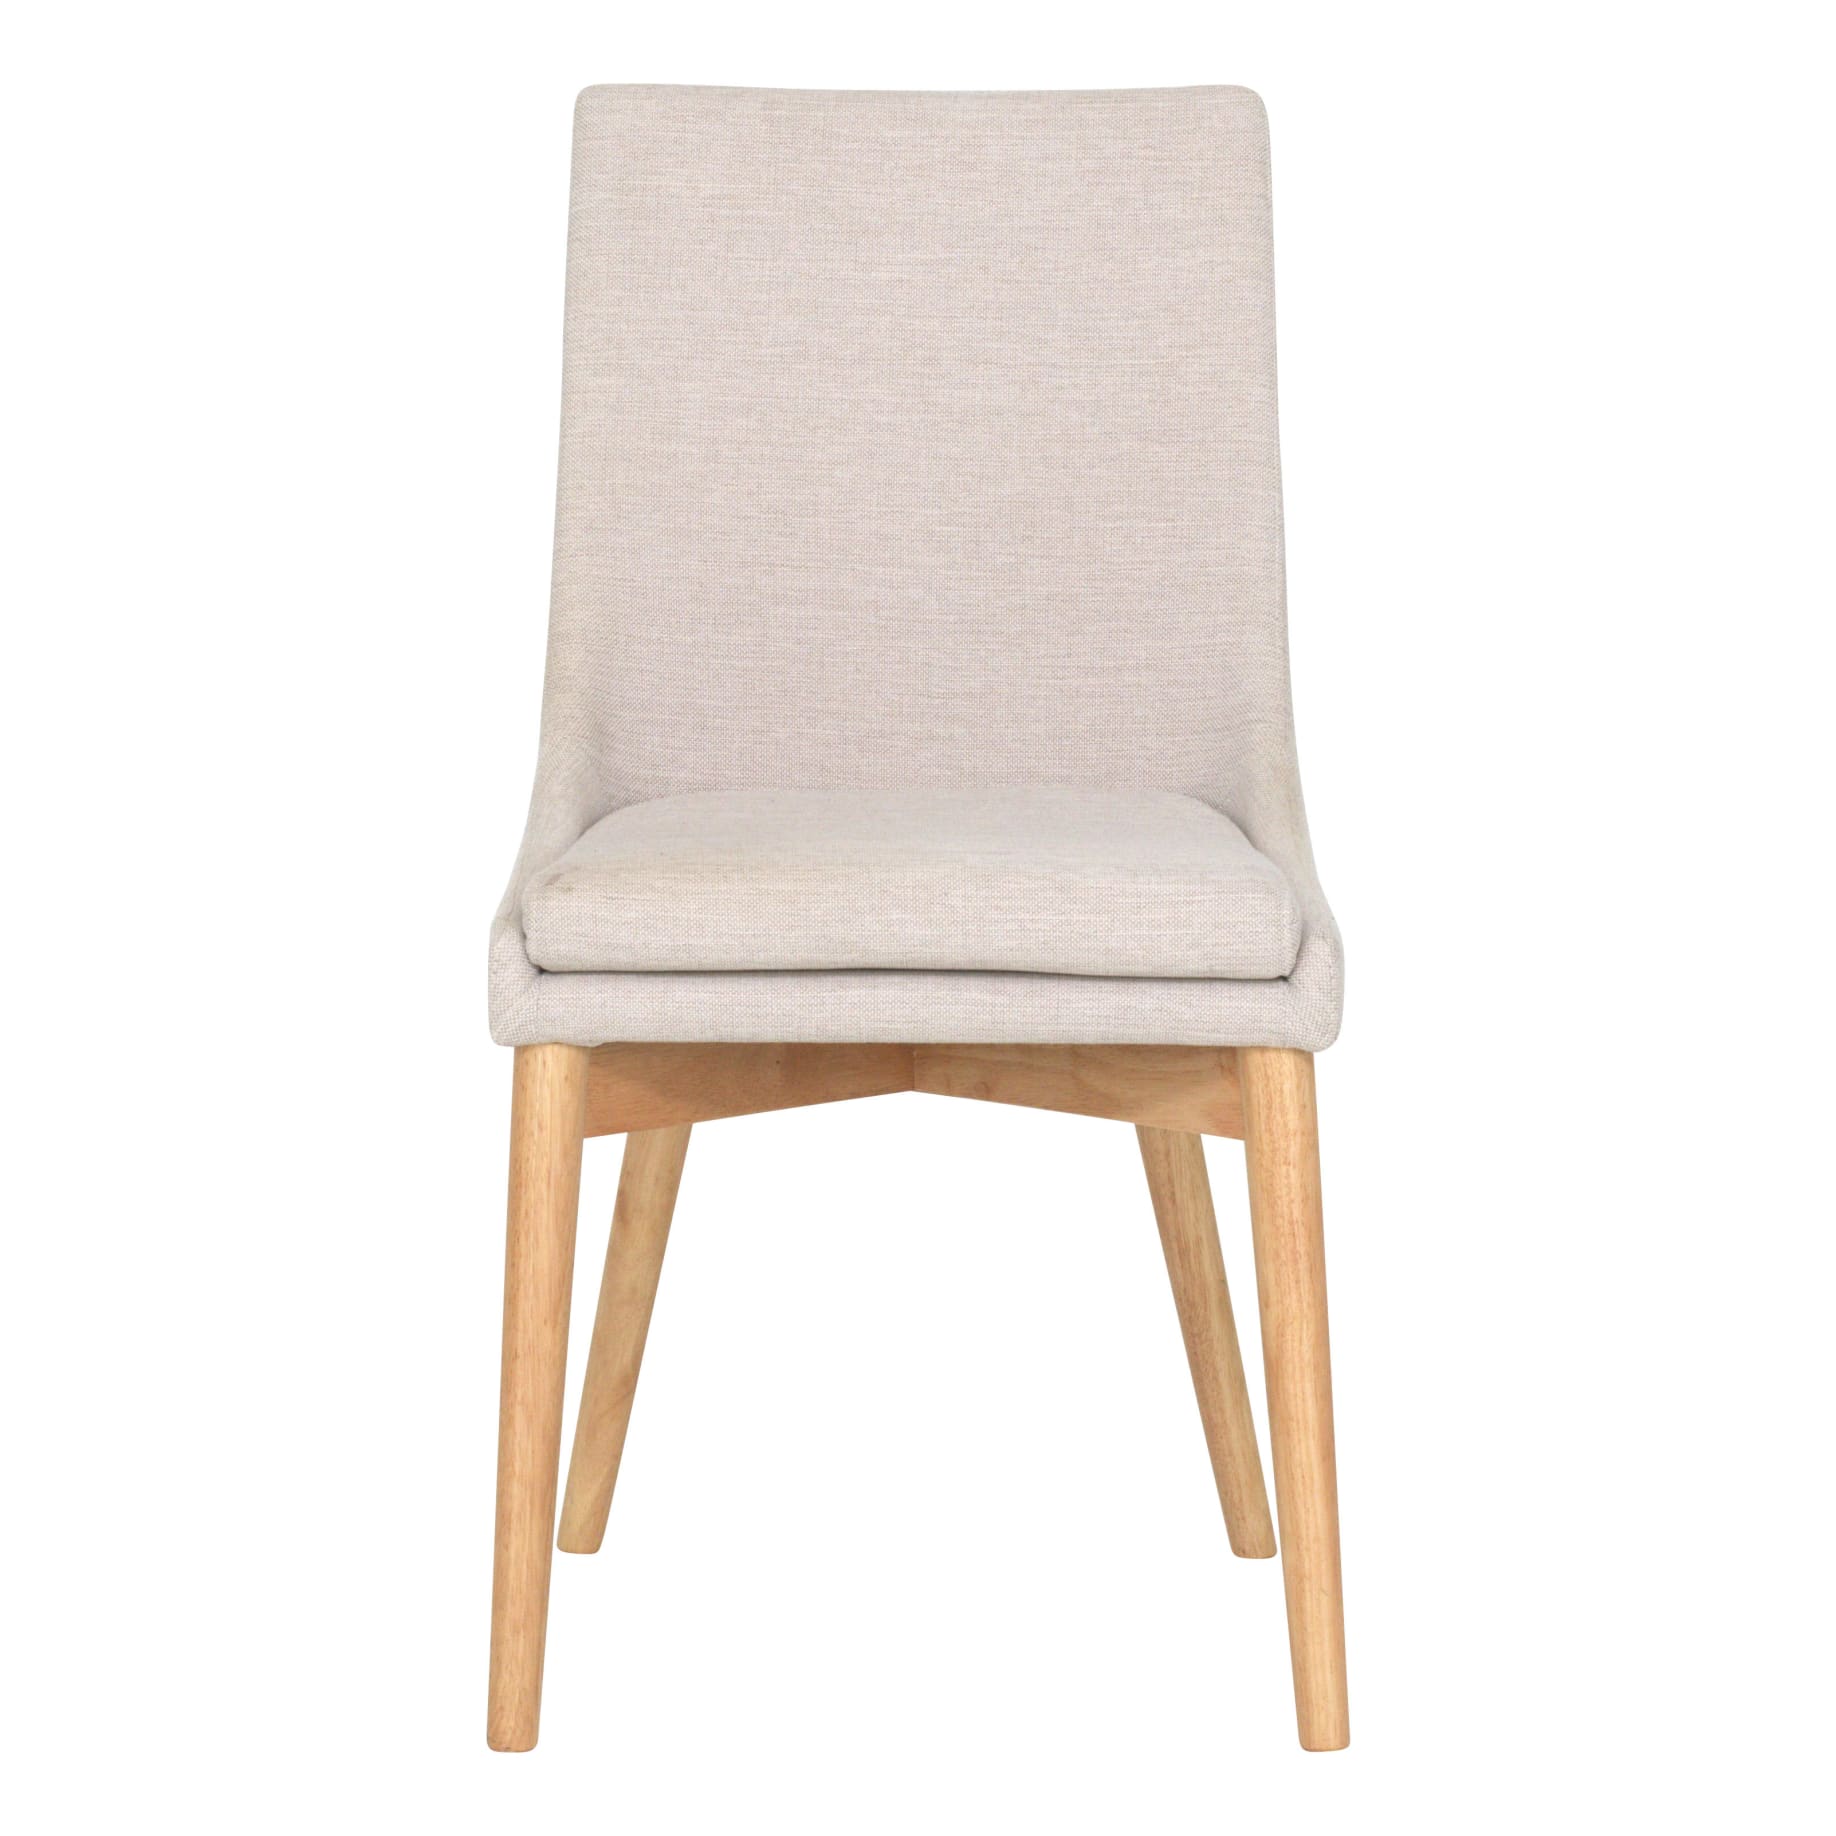 Highland Dining Chair in Beige / Oak Stain